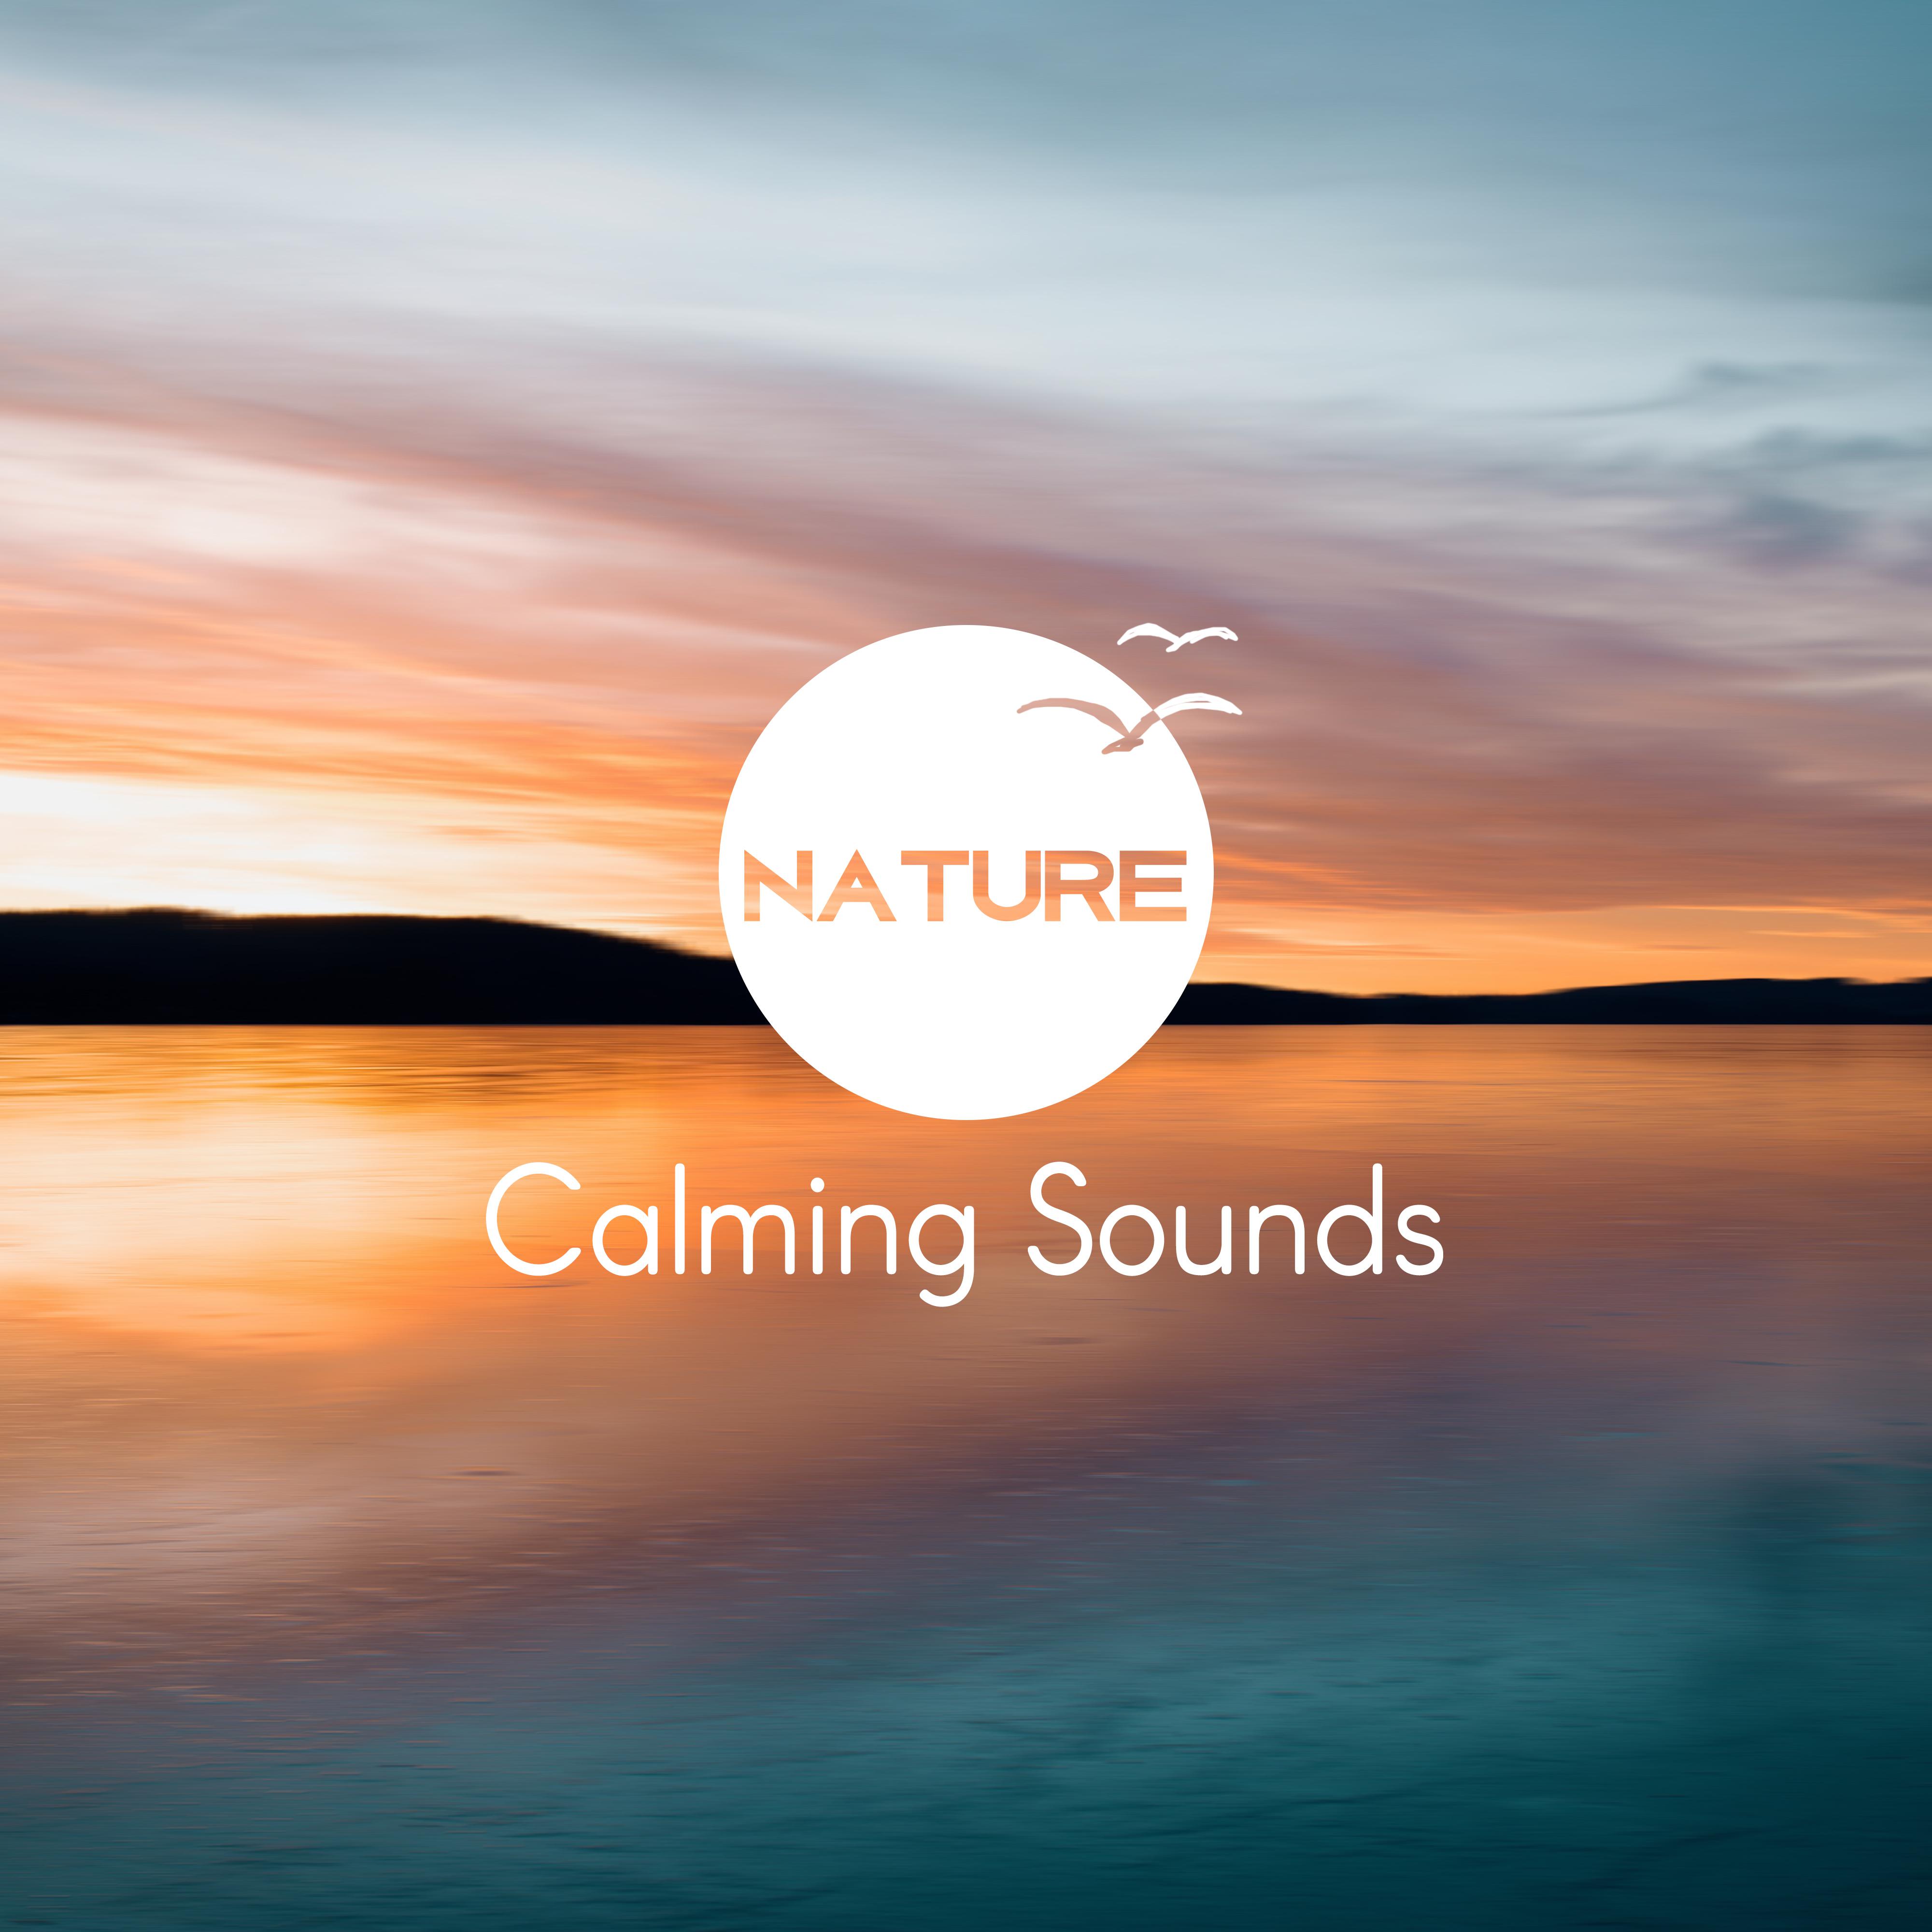 Nature Calming Sounds – Music to Relax, Sounds to Rest, New Age Calmness, Soft Ocean Waves